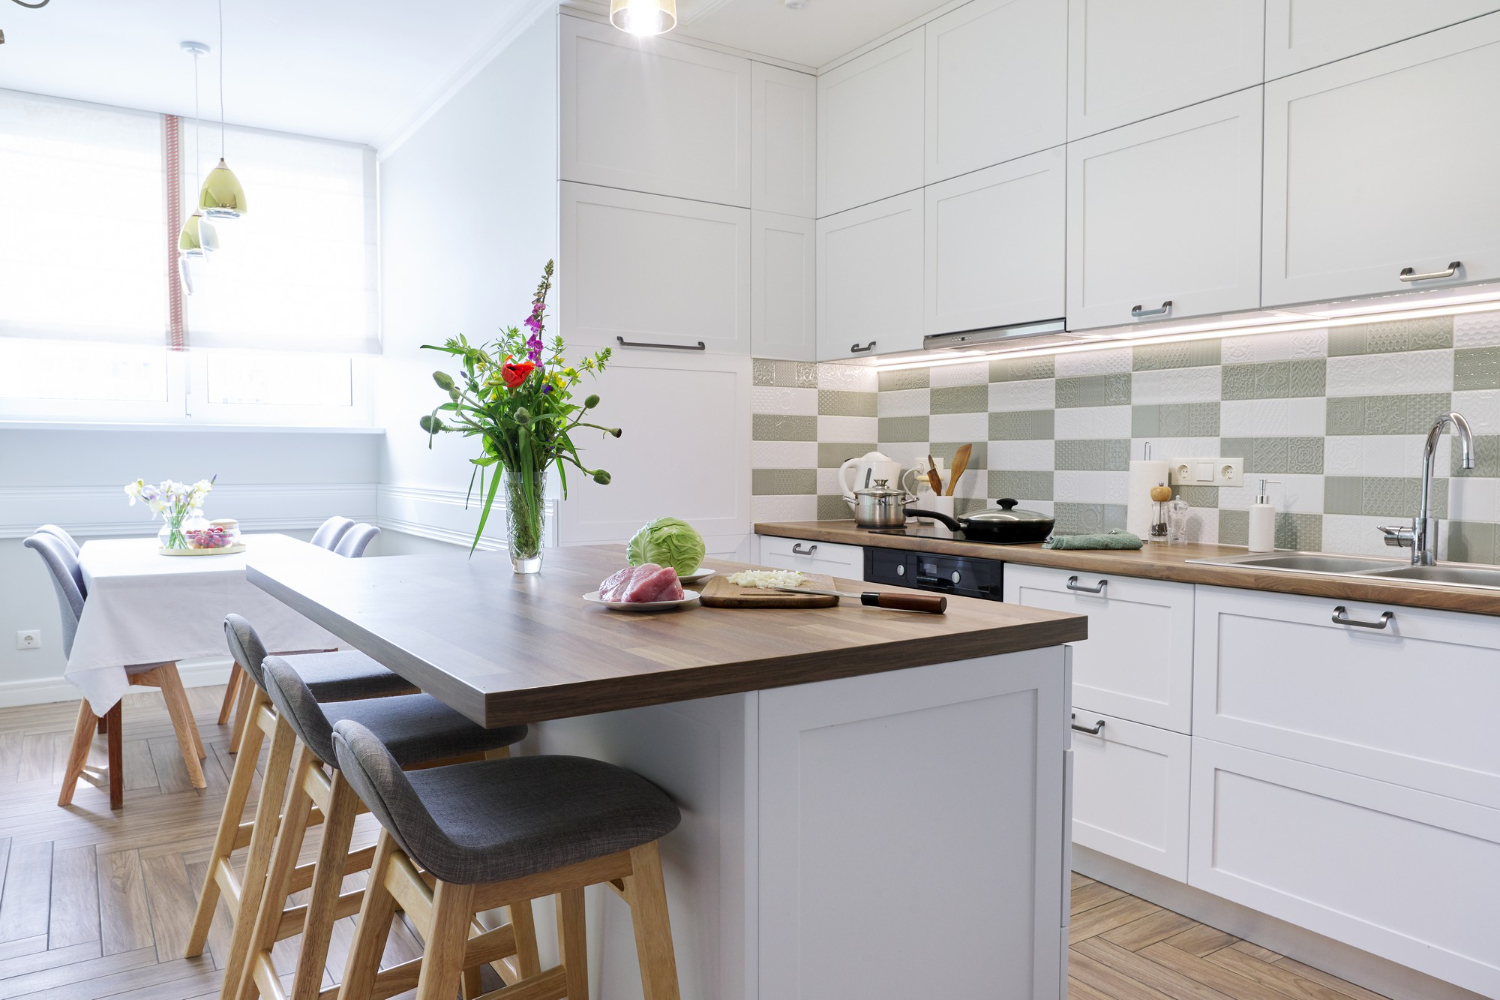 Shaker style kitchen – see how to decorate it!